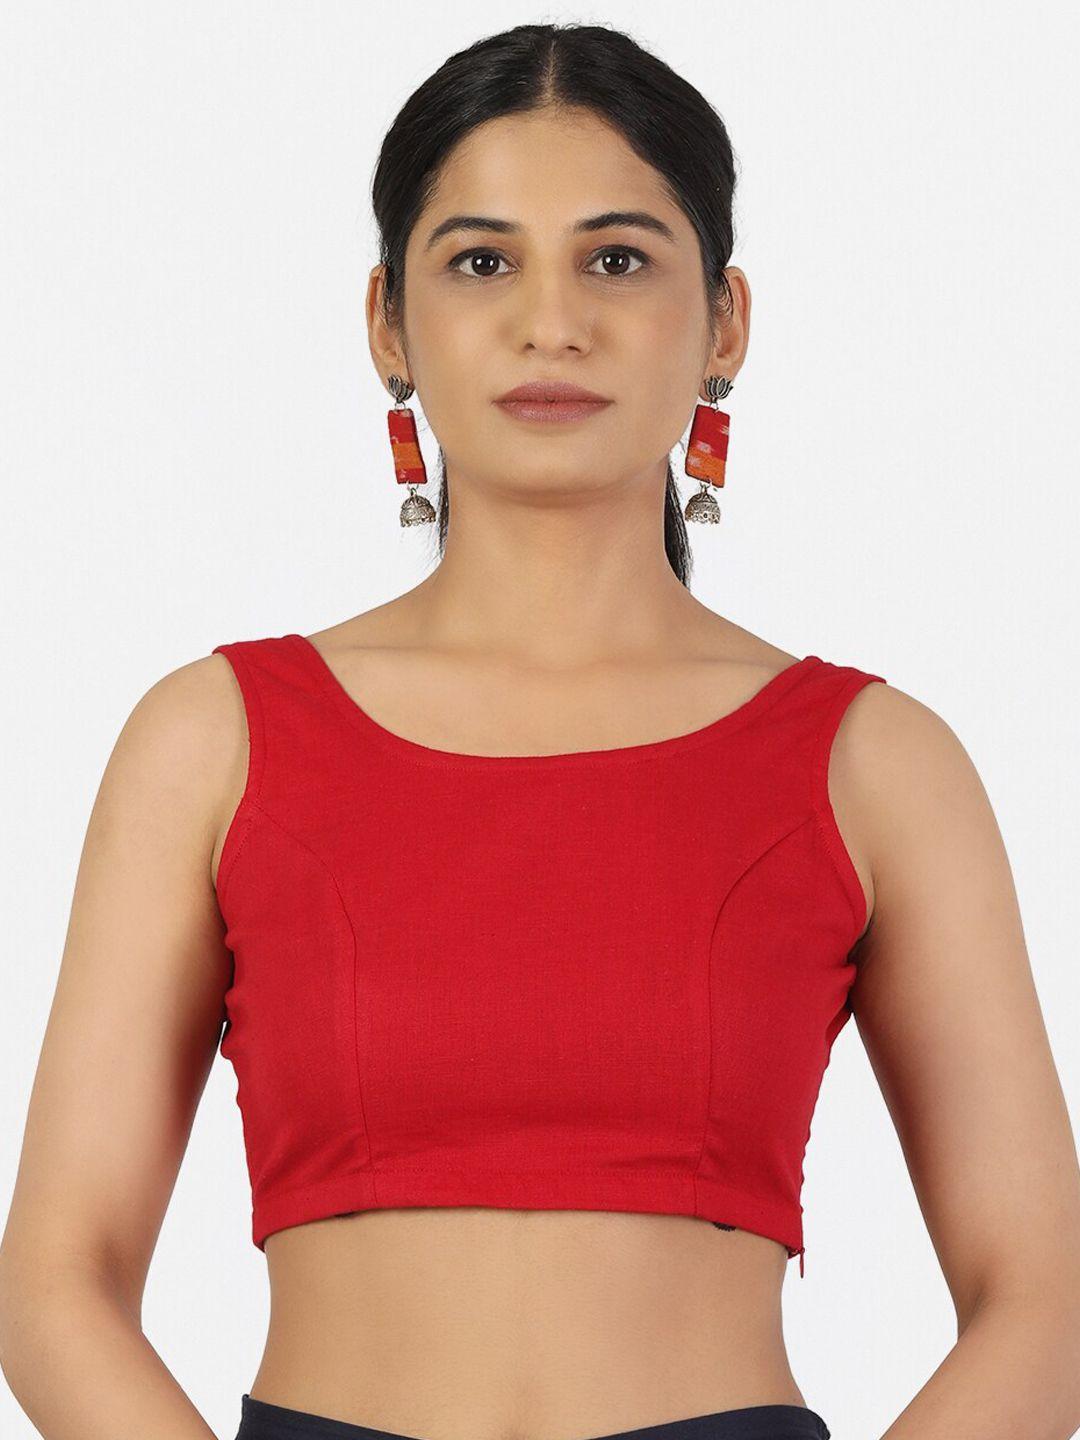 llajja-women-red-solid-pure-cotton-non-padded-saree-blouse